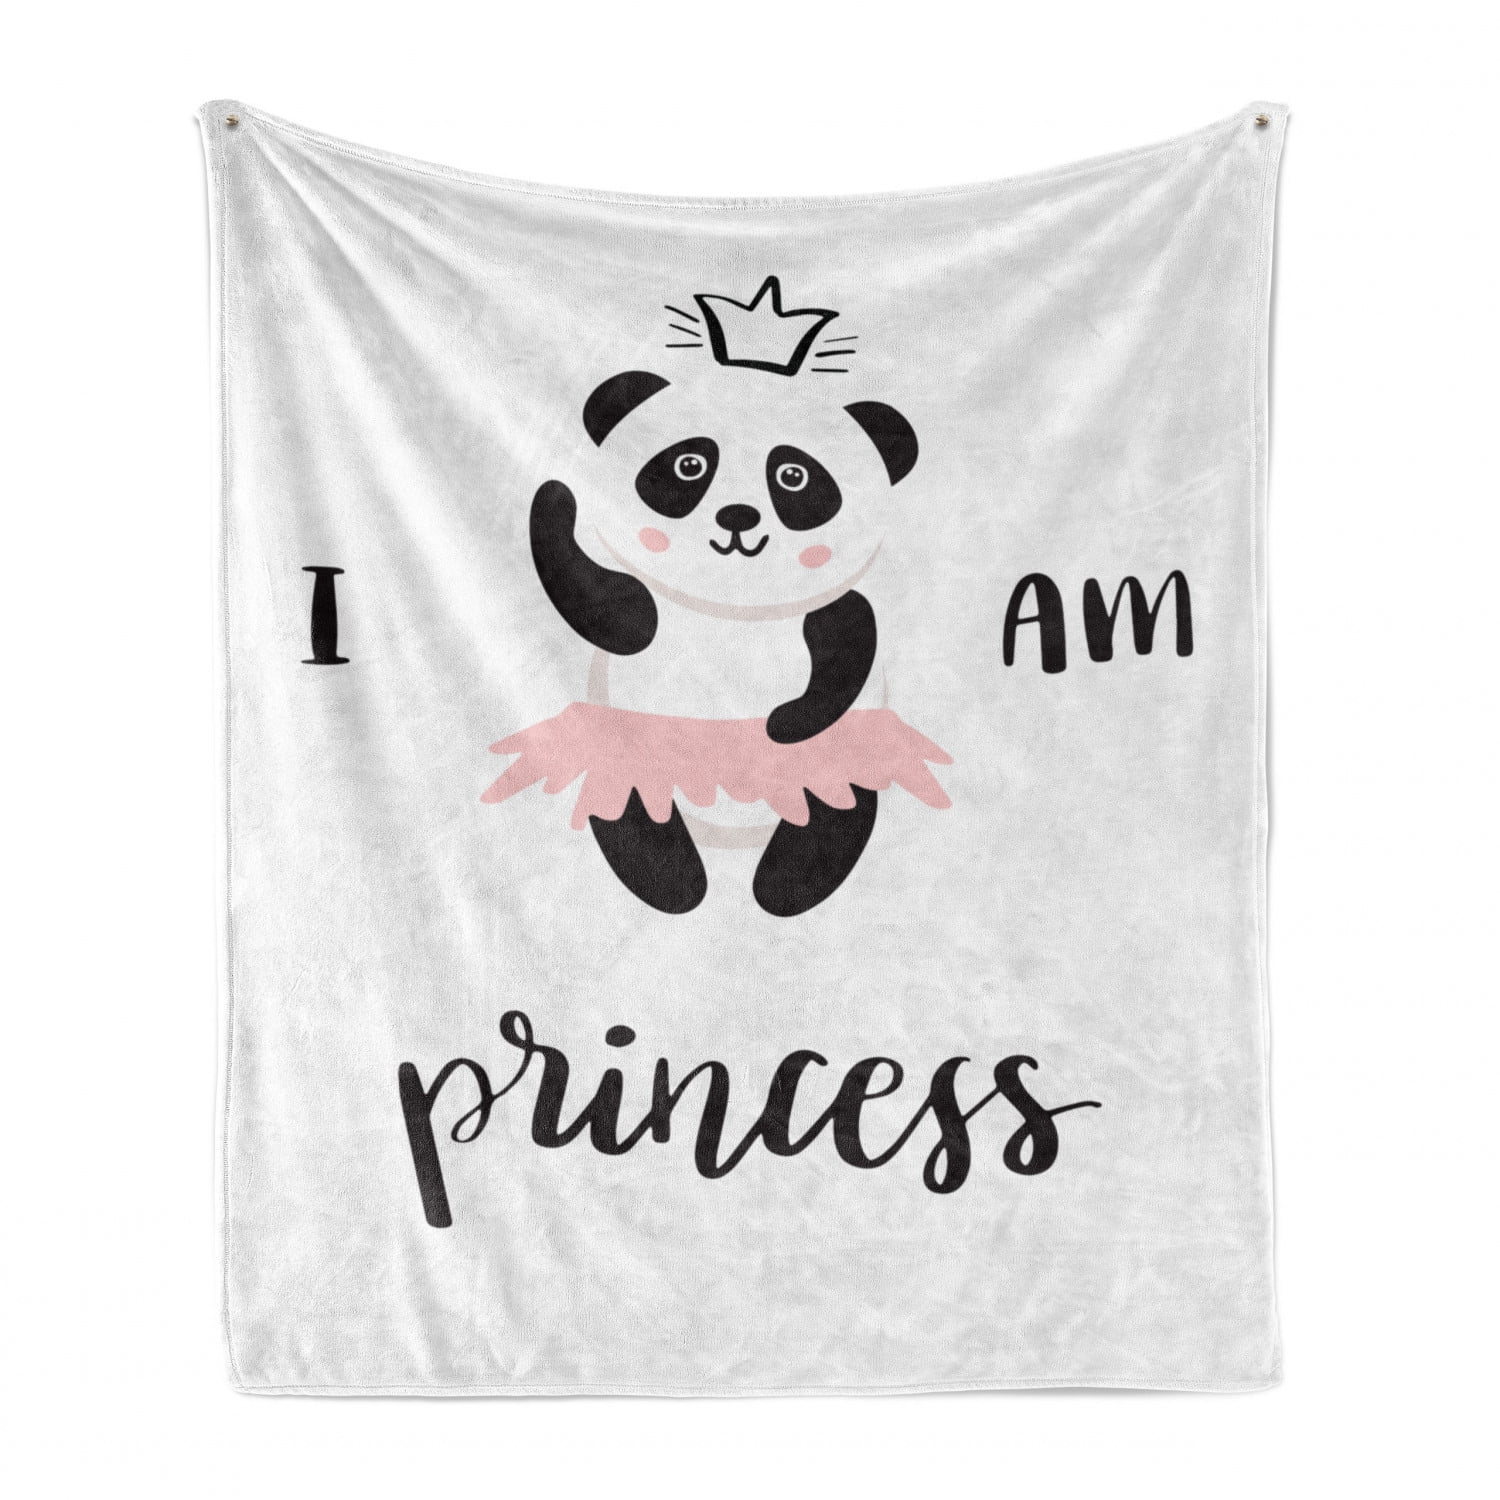 LsWOW Wearable Blanket I am a Princess,Funny Ballerina Panda Bear Dancing in Pink Skirt Baby Kids Girls,Black and White Rose Throw Lightweight Cozy Plush Microfiber Solid Blanket 35x60 